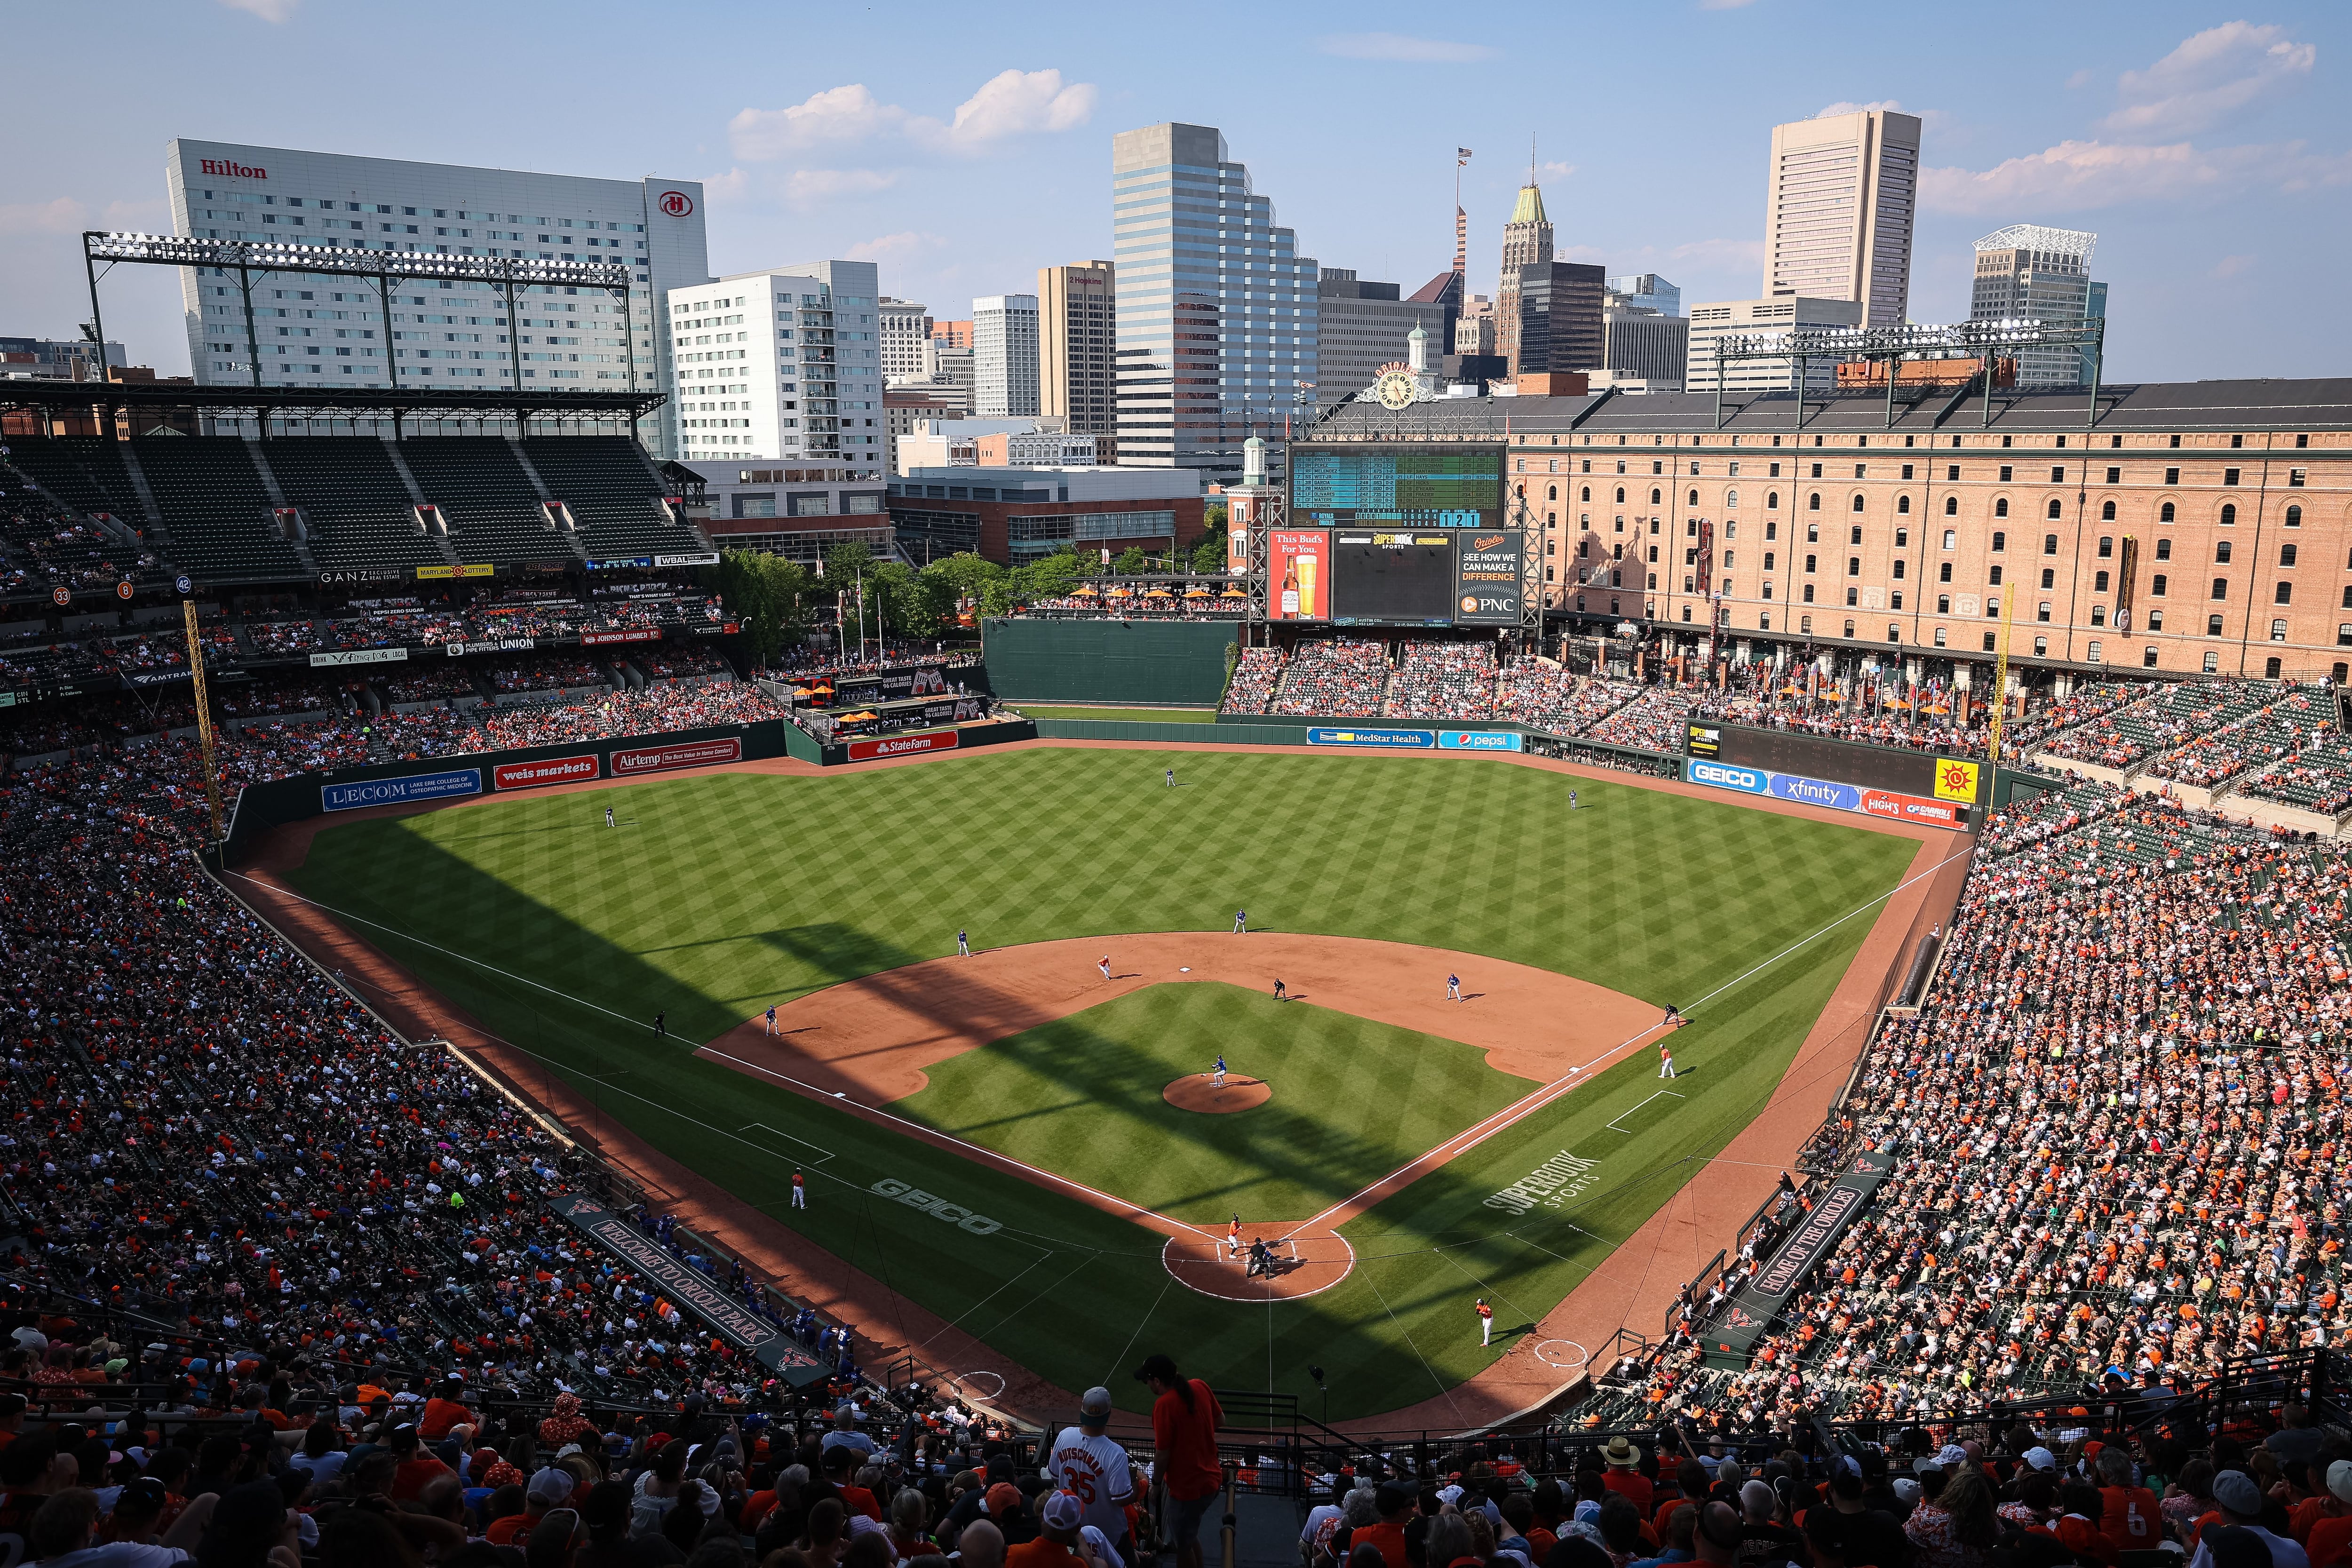 Camden Yards could see massive private development under new